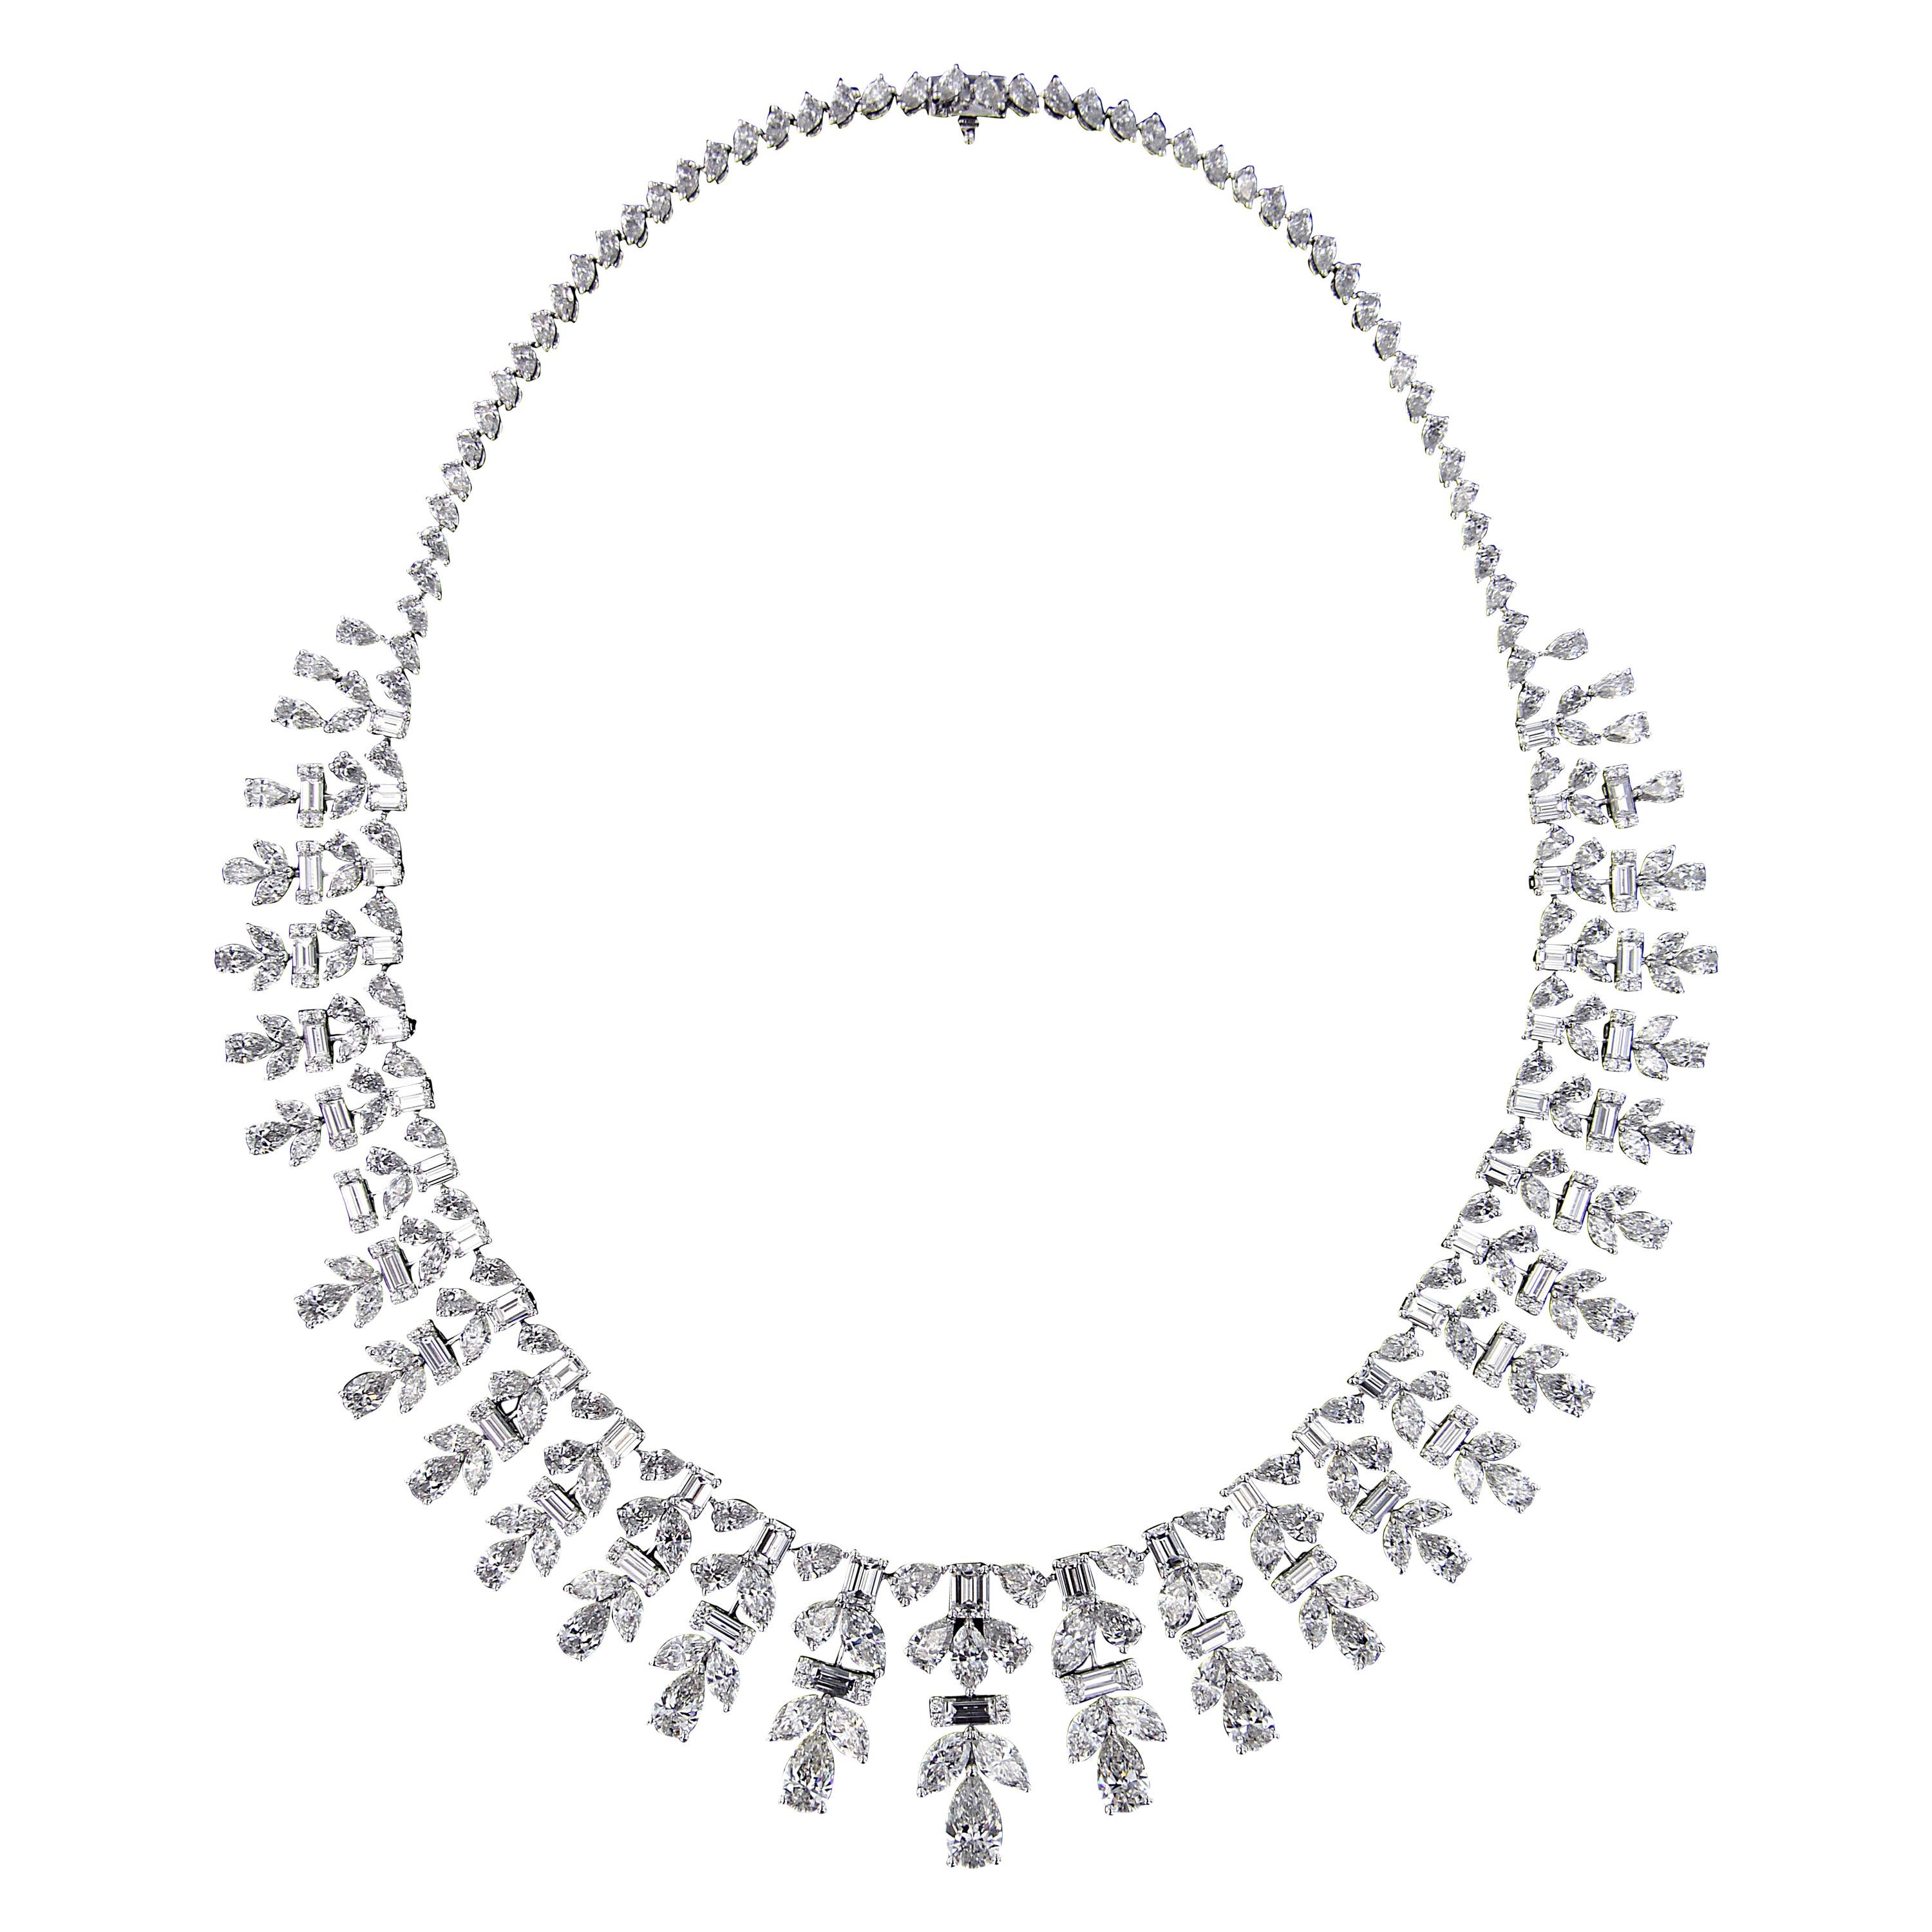 Sumptuous 18 Karat White Gold and Diamond Wedding Necklace For Sale